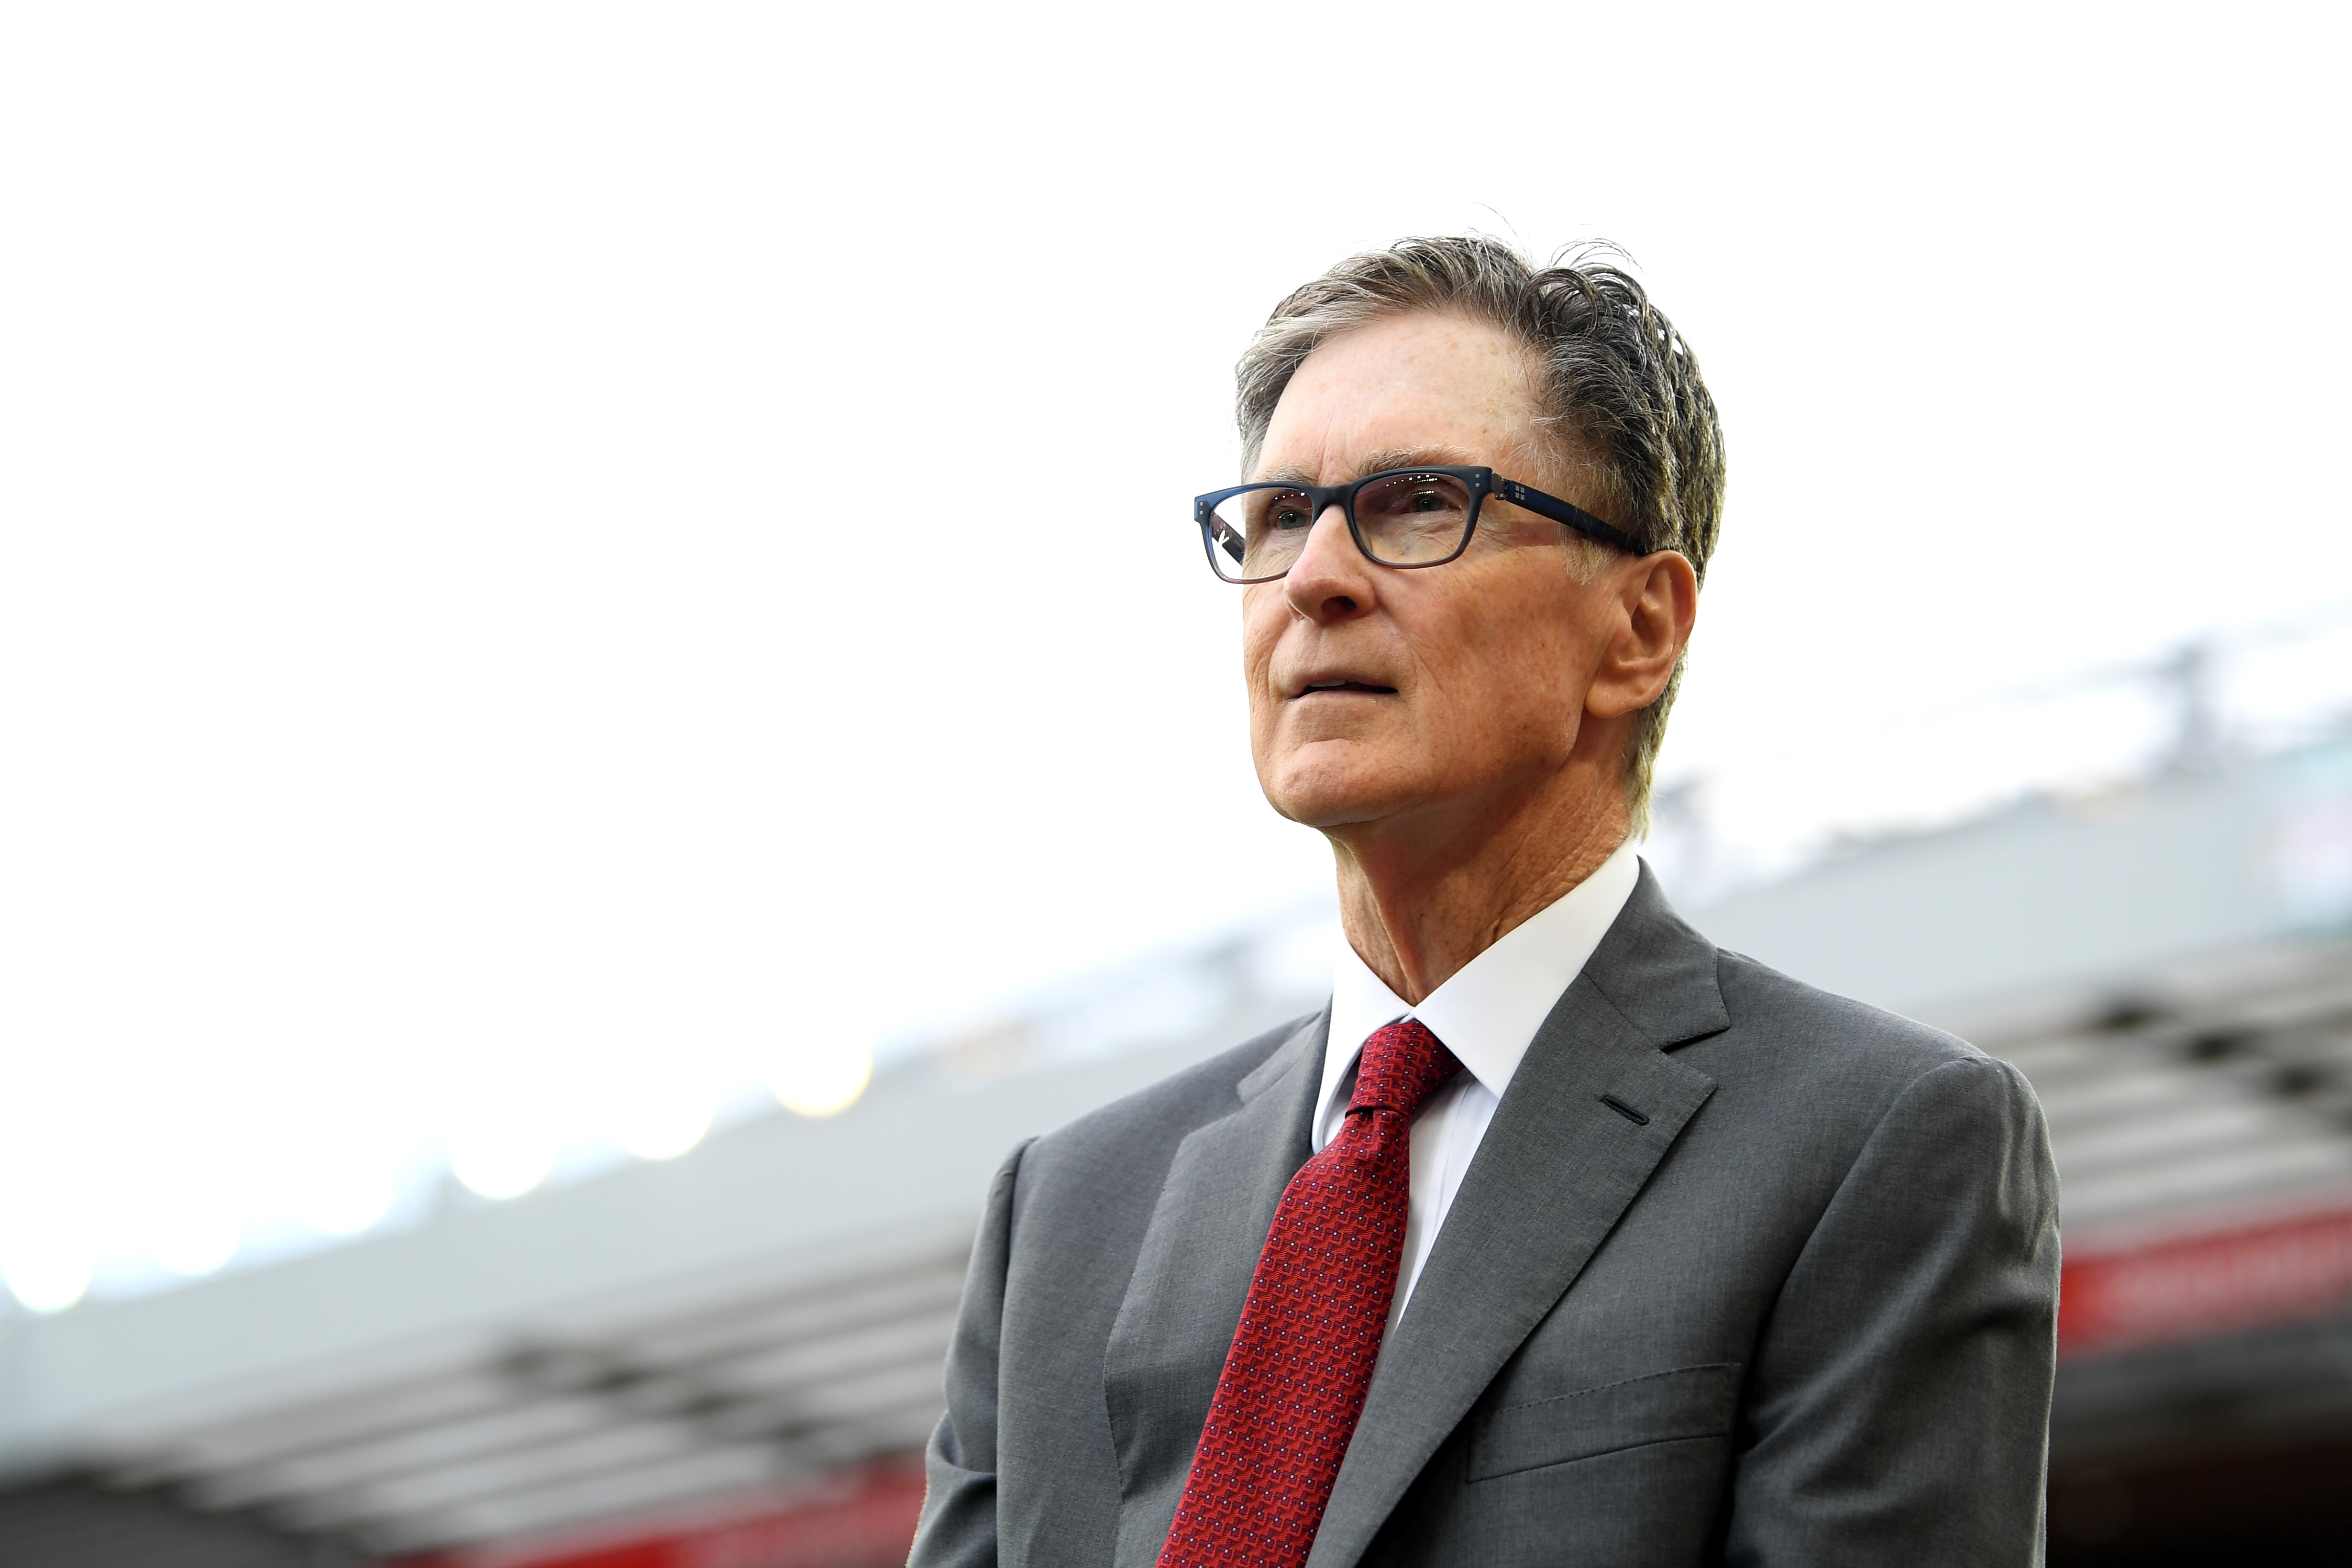 Liverpool owner John W. Henry ahead of the Premier League match between Liverpool FC and Norwich City in 2019.